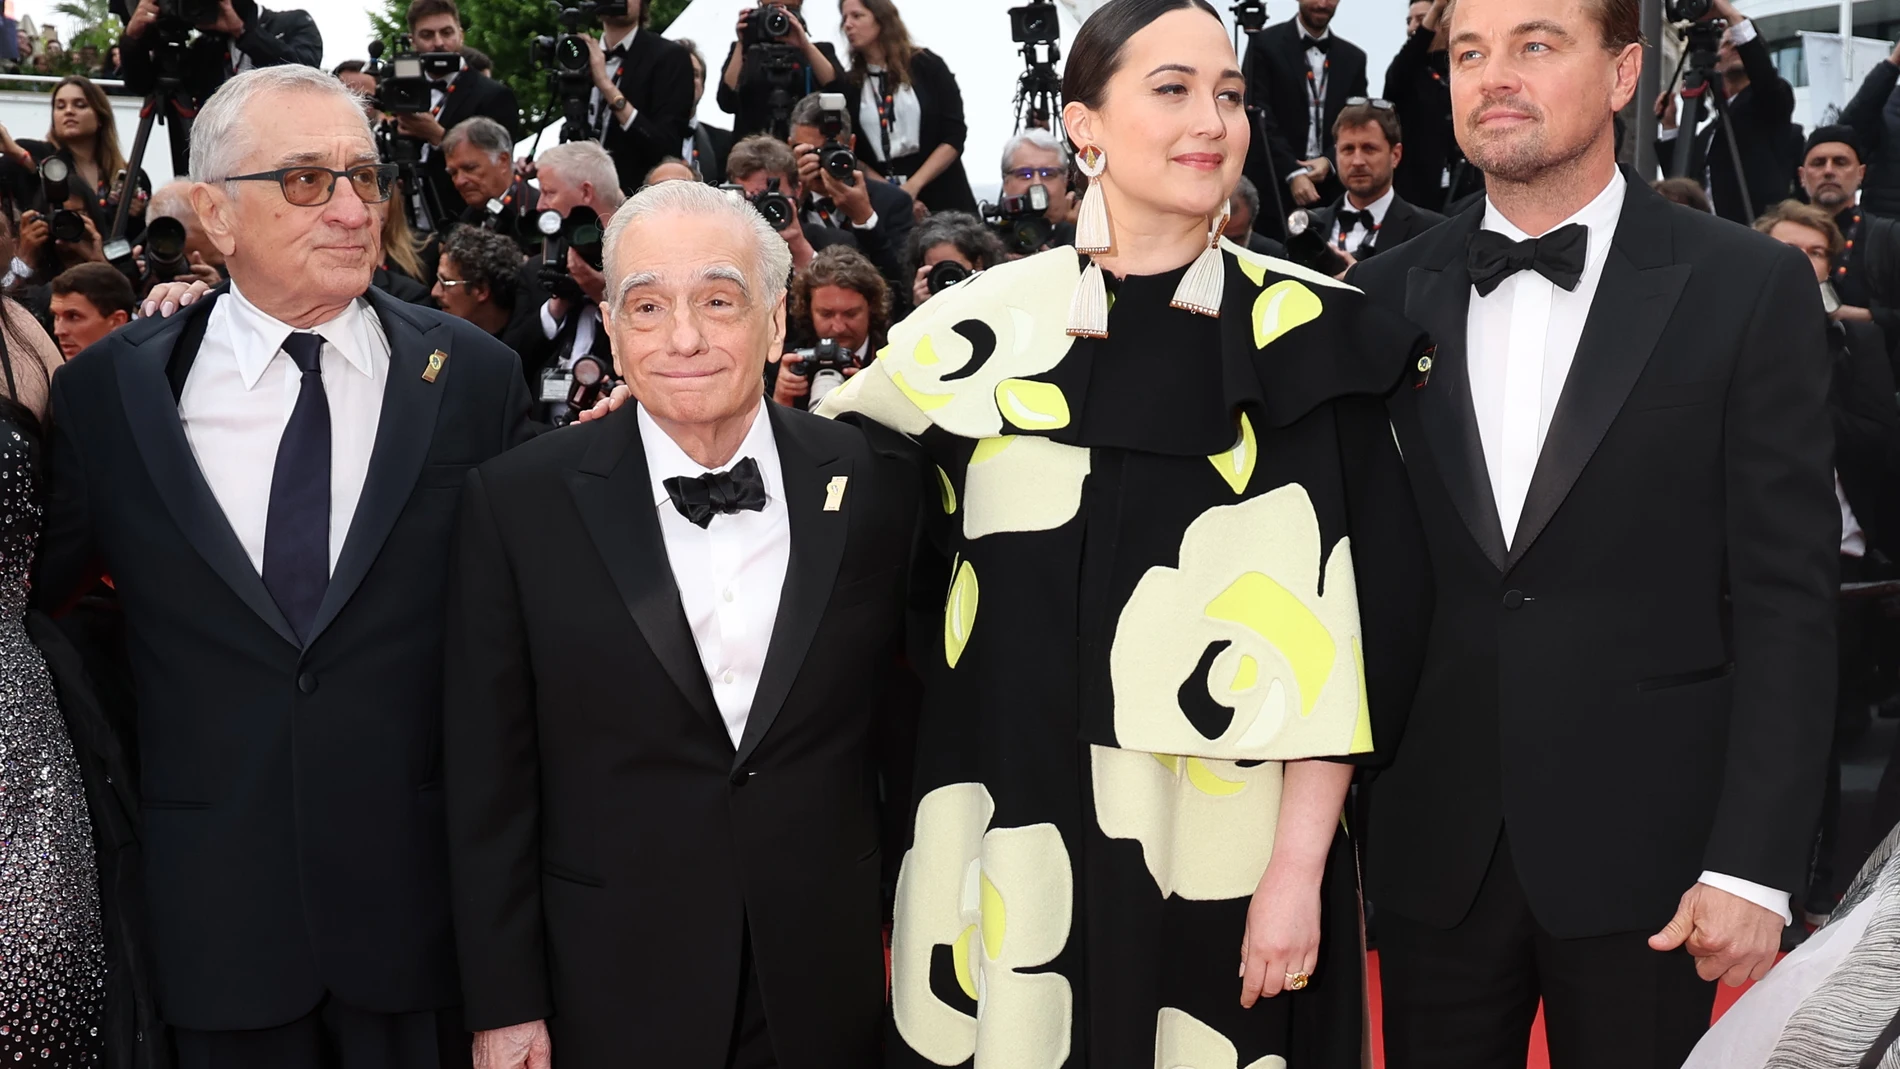 Cannes (France), 20/05/2023.- (R-L) Leonardo Dicaprio, Lily Gladstone, director Martin Scorsese and Robert De Niro arrive for the screening of 'Killers of the Flower Moon' during the 76th annual Cannes Film Festival, in Cannes, France, 20 May 2023. The festival runs from 16 to 27 May. (Cine, Francia) EFE/EPA/Mohammed Badra 